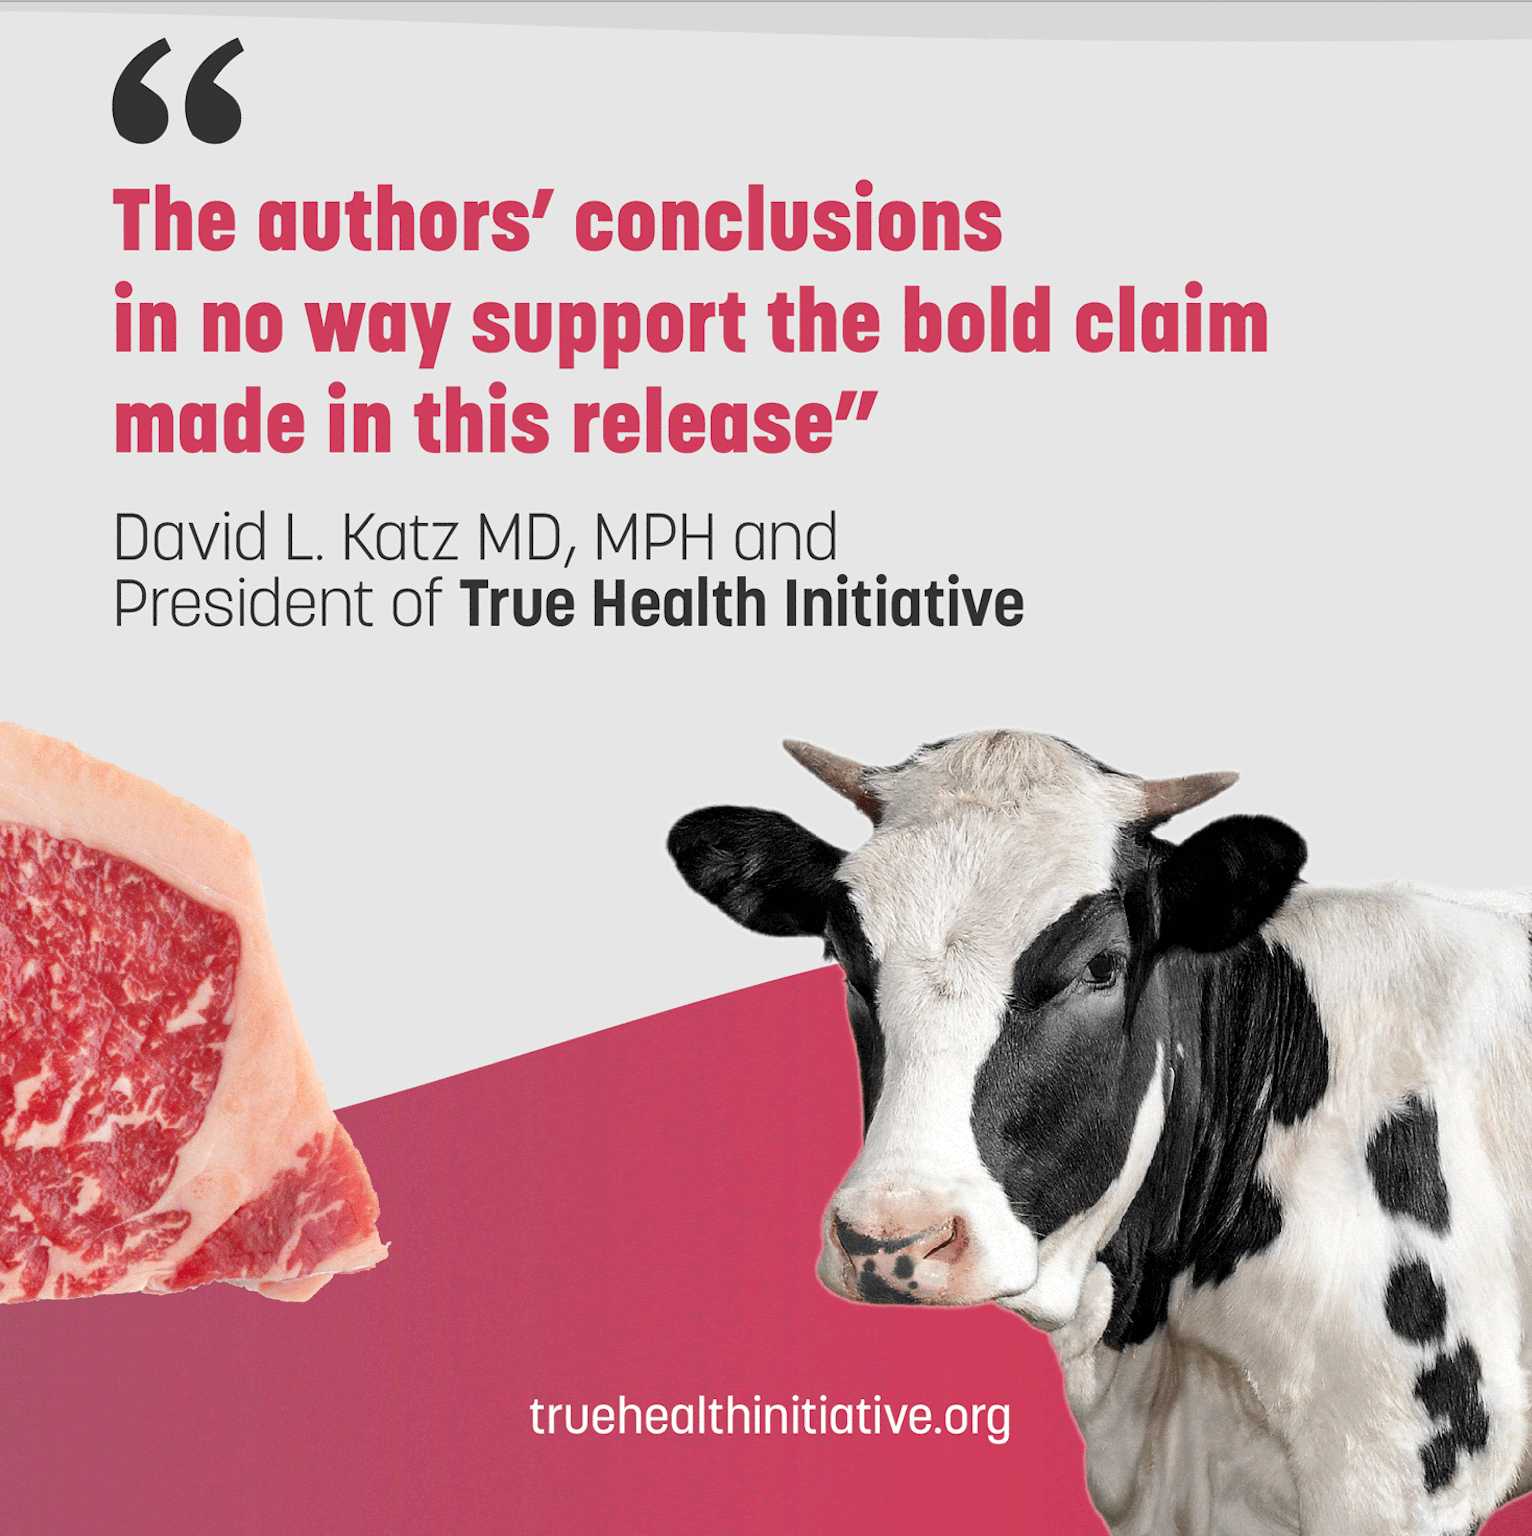 https://foodrevolution.org/wp-content/uploads/true-health-initiative-red-meat-claim-bad-3.png